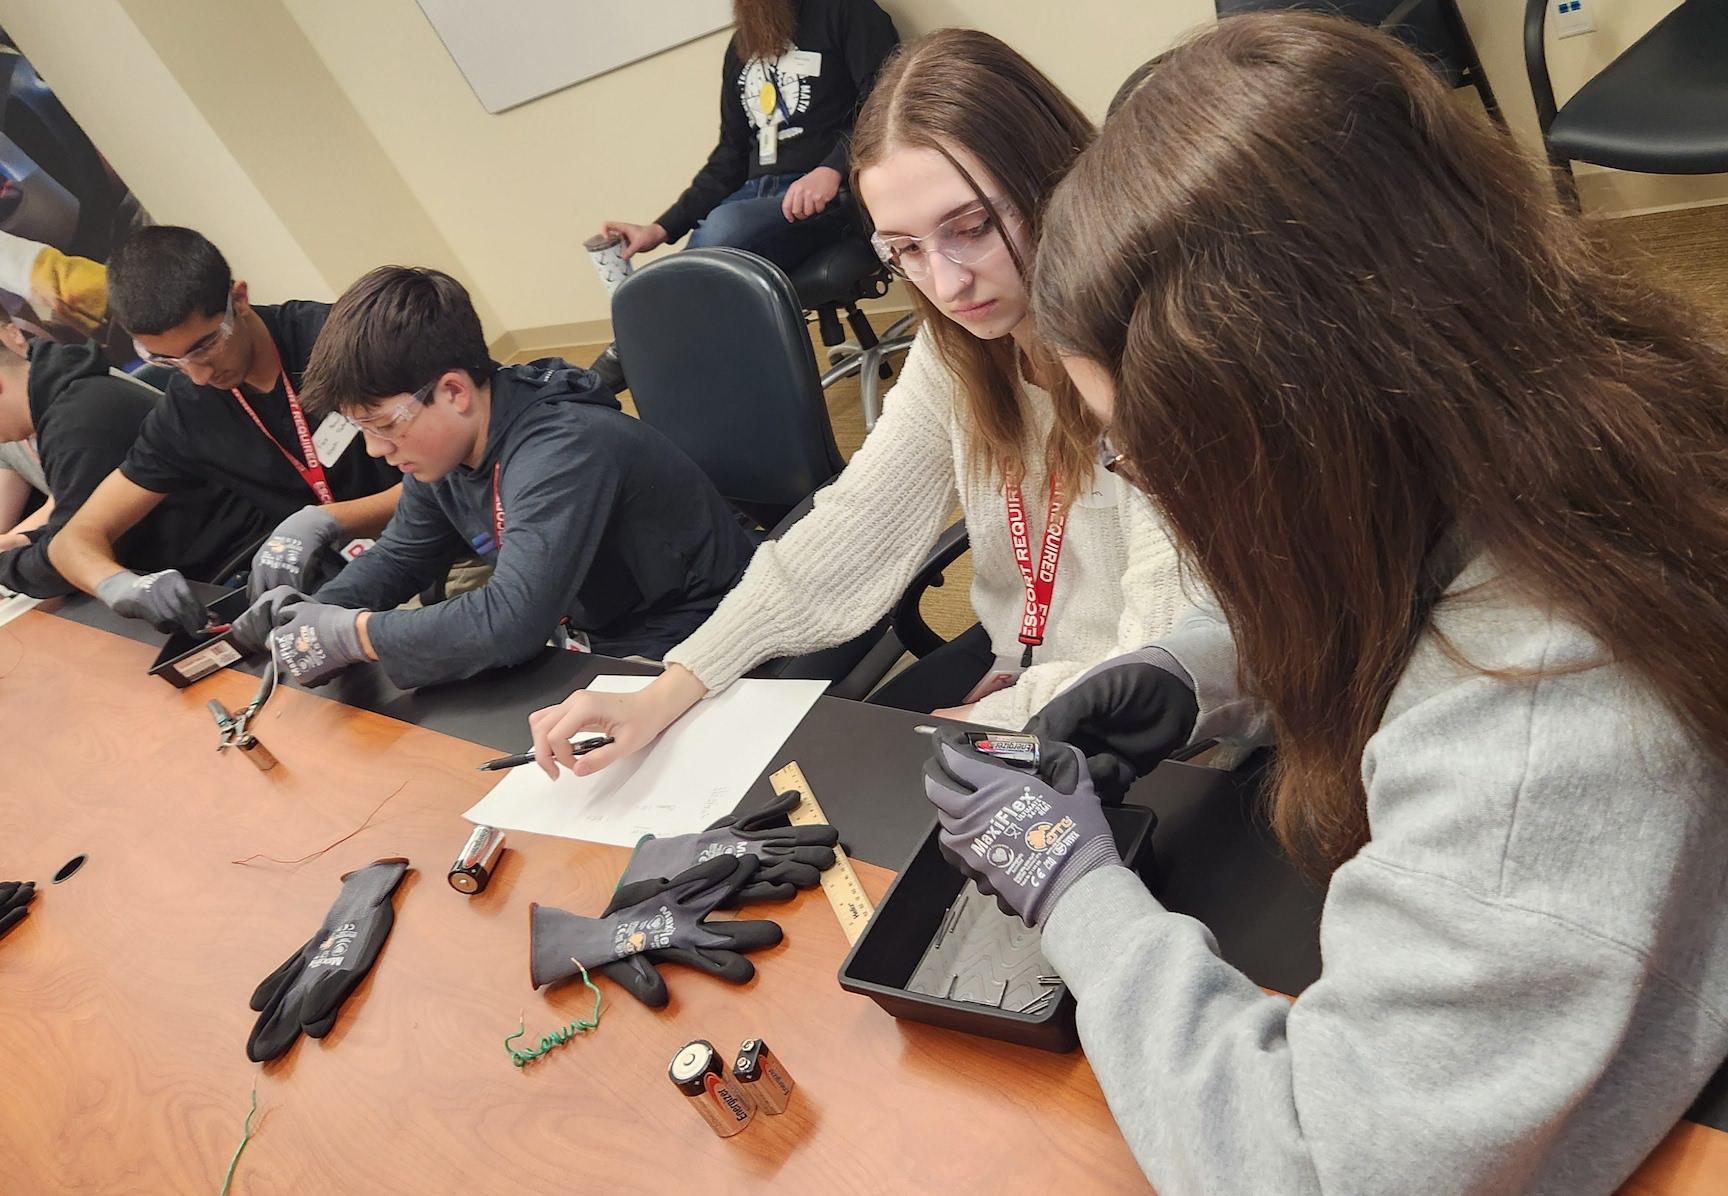 Students practice electromagnetic experimentation using wires, nails, and batteries